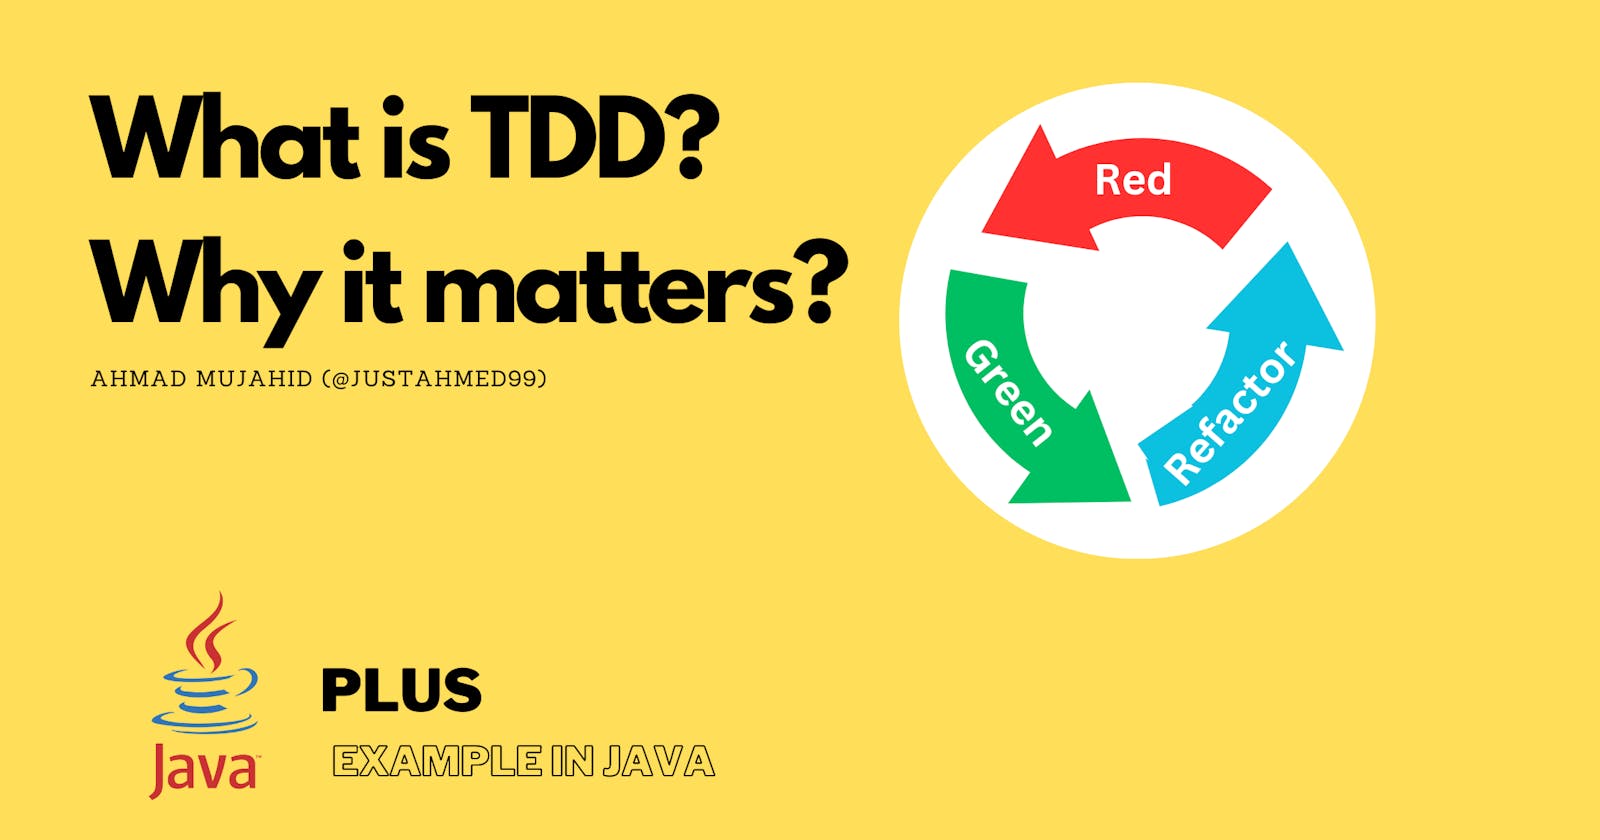 What is Test Driven Development (TDD) and Why It Matters